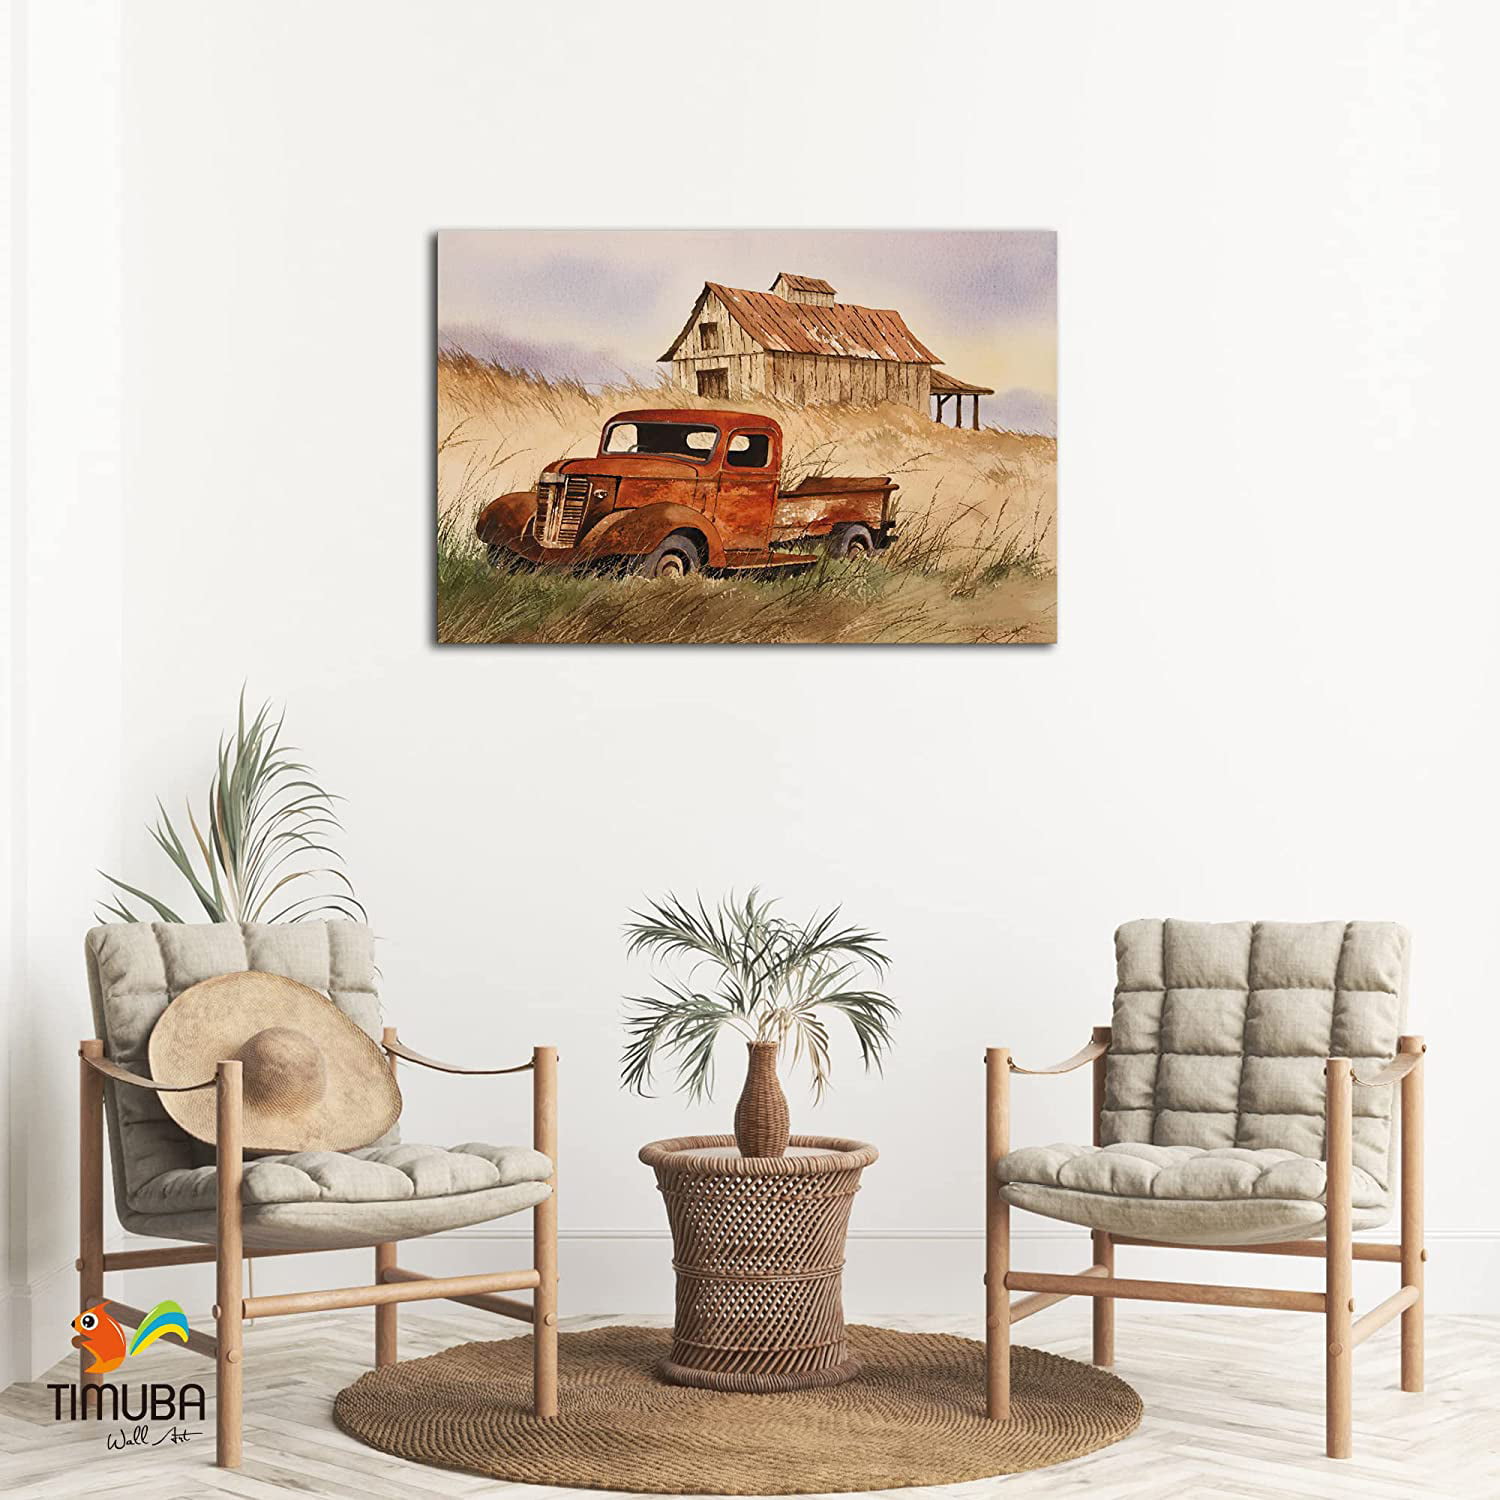 BIANYQ Farmhouse Wall Art for Living Room Family Wall Decorations for  Bedroom Modern Bathroom Wall Decor Painting Rustic Old Barn Painting Room  Pictures Artwork Canvas Art Prints 12x18 In